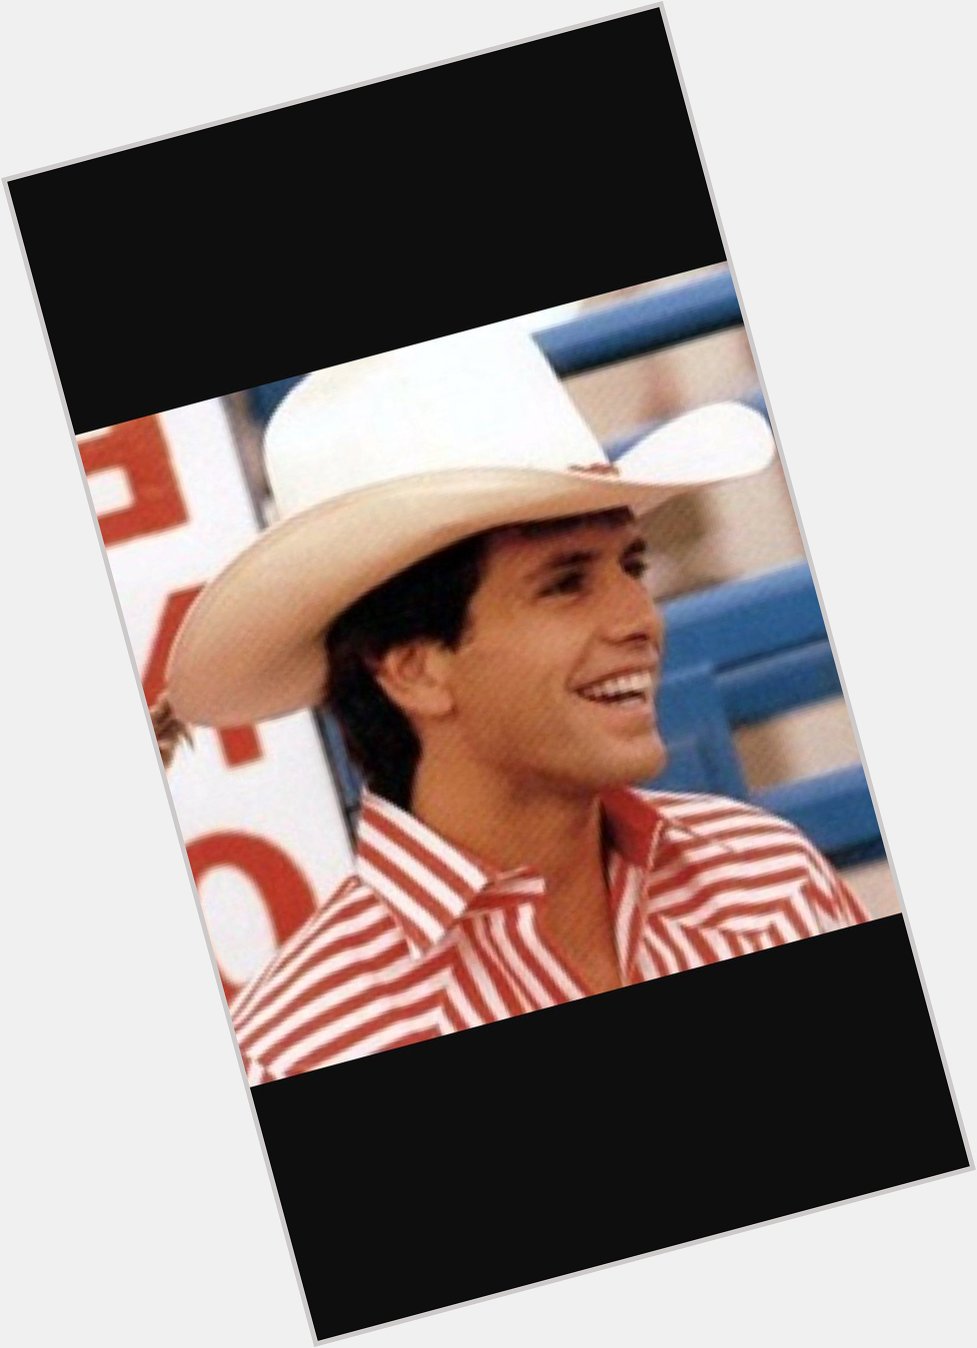 Happy Bday to my hero! The man, the myth, the legend Lane Frost. RIP we all know you\re breaking records up there!!! 